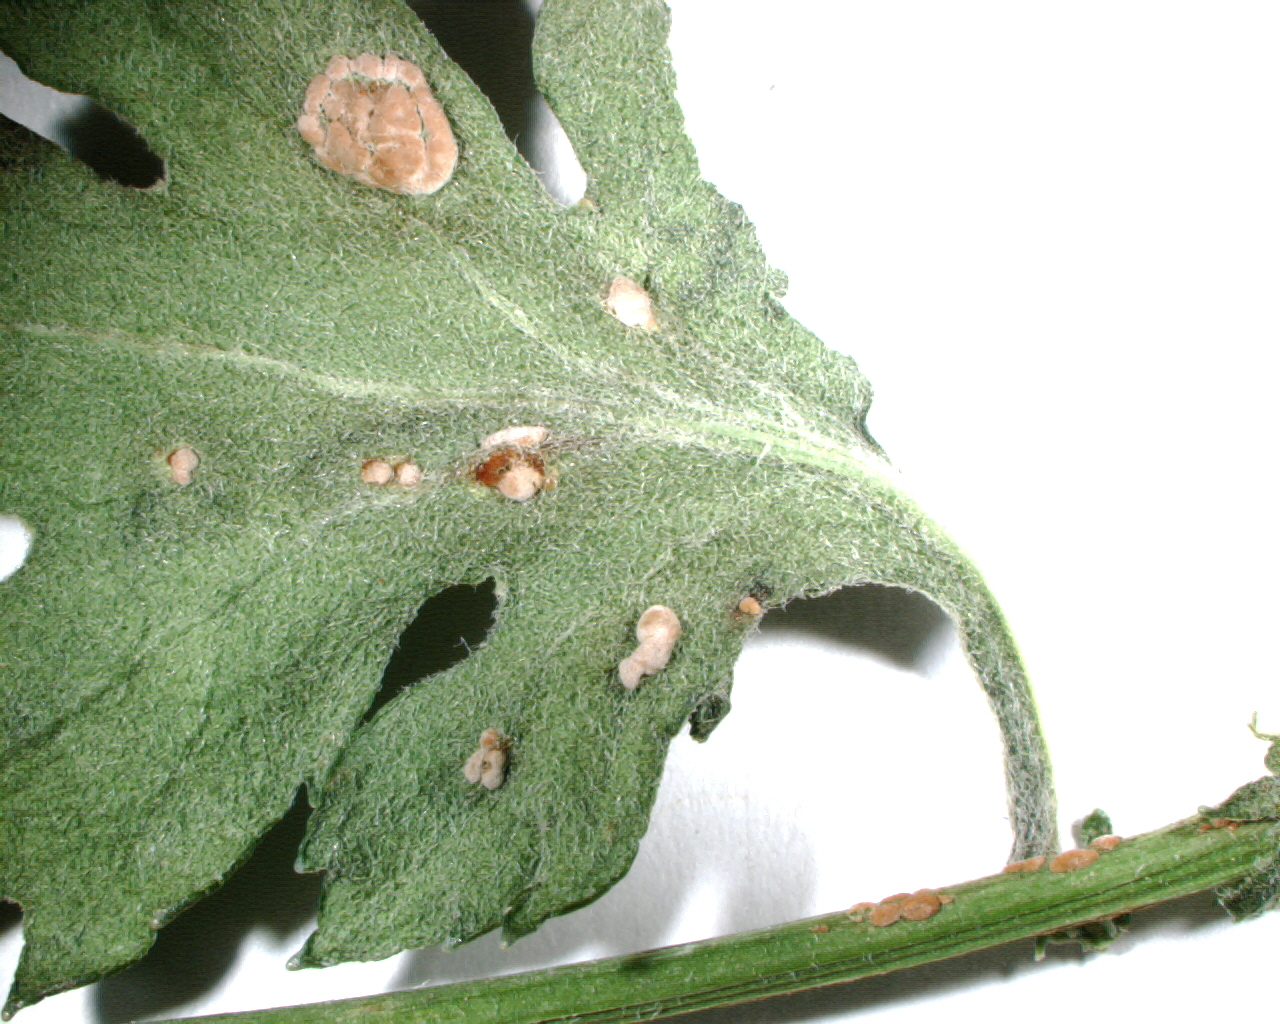 Chrysanthemum white rust, Puccinia horiana ,on the upper leaf surface and stem of an infected Chrysanthemum.  Infected Chrysanthemums are unmarketable resulting in large economic losses.